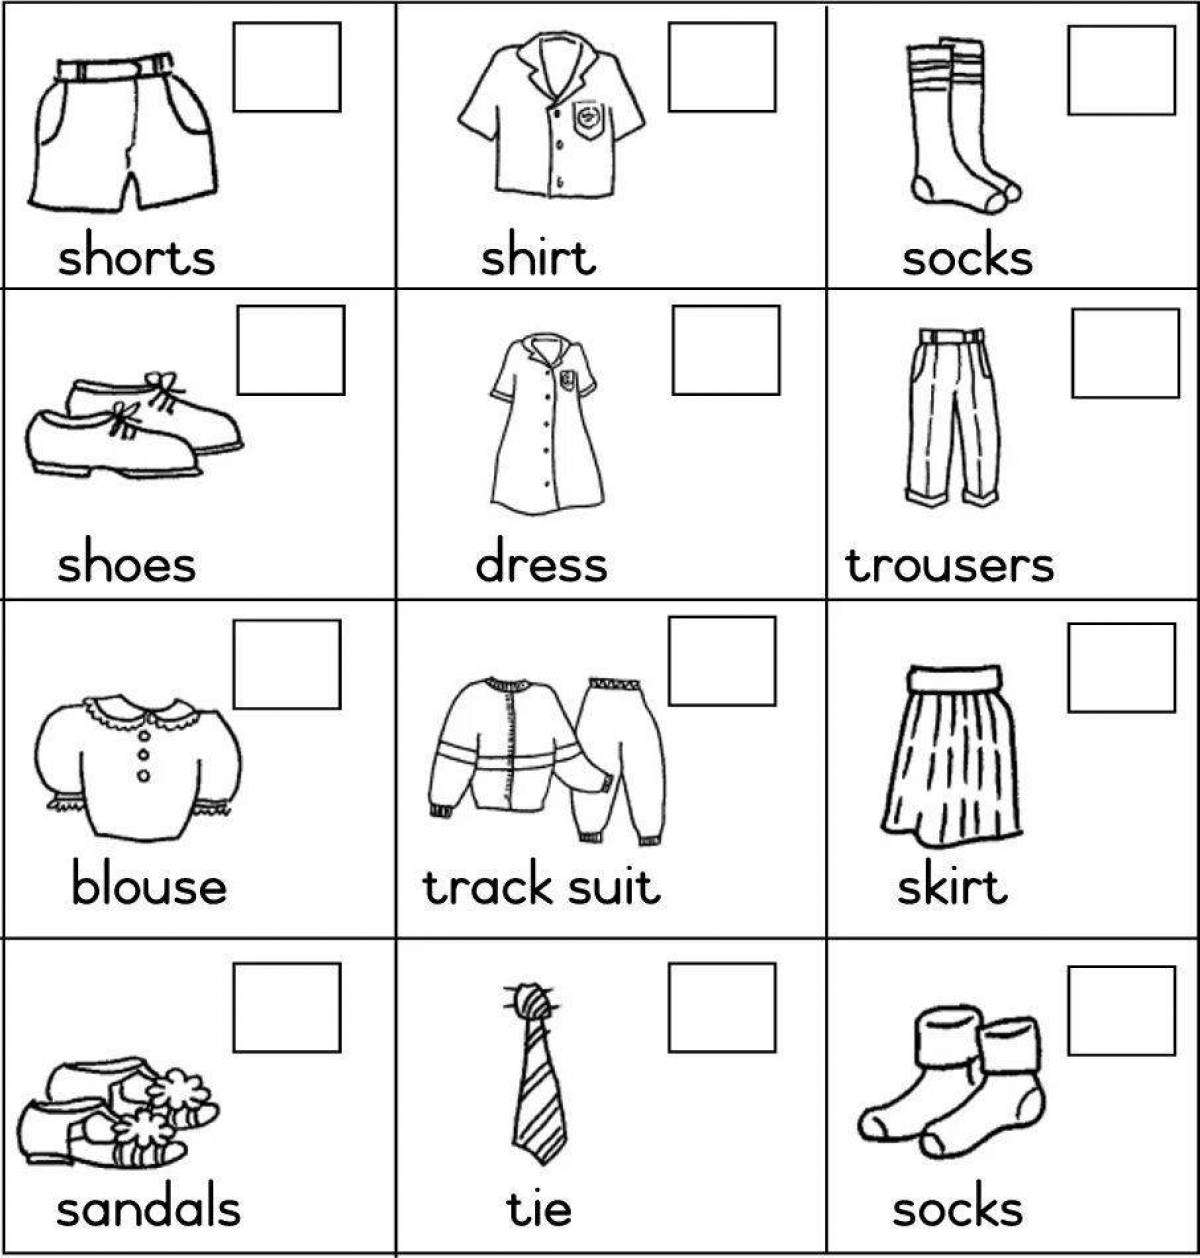 English for kids clothes #13